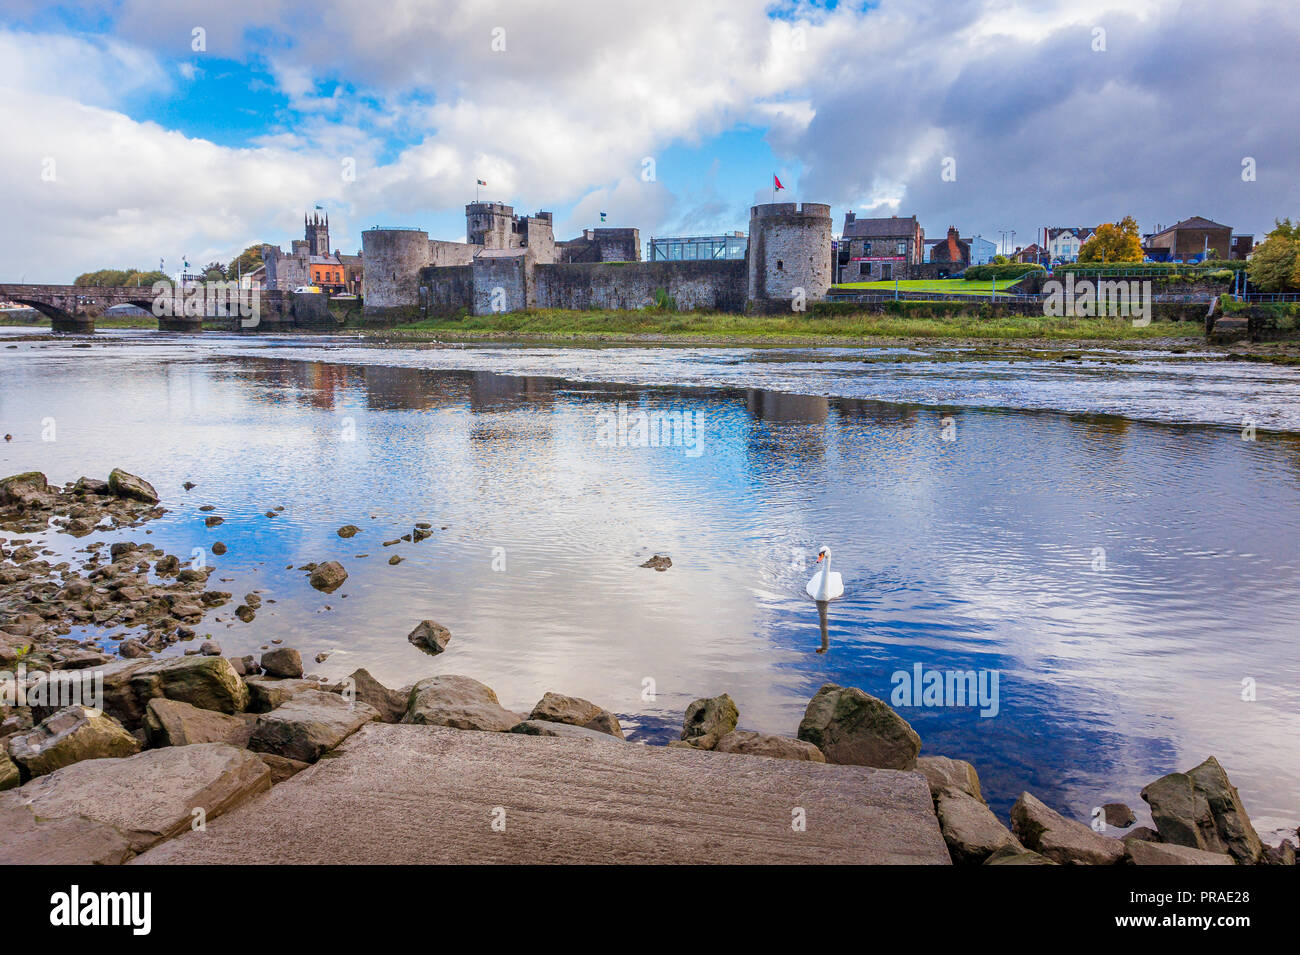 Beautiful panoramic view over medieval King John's Castle and River Shannon in Limerick city, Republic of Ireland Stock Photo